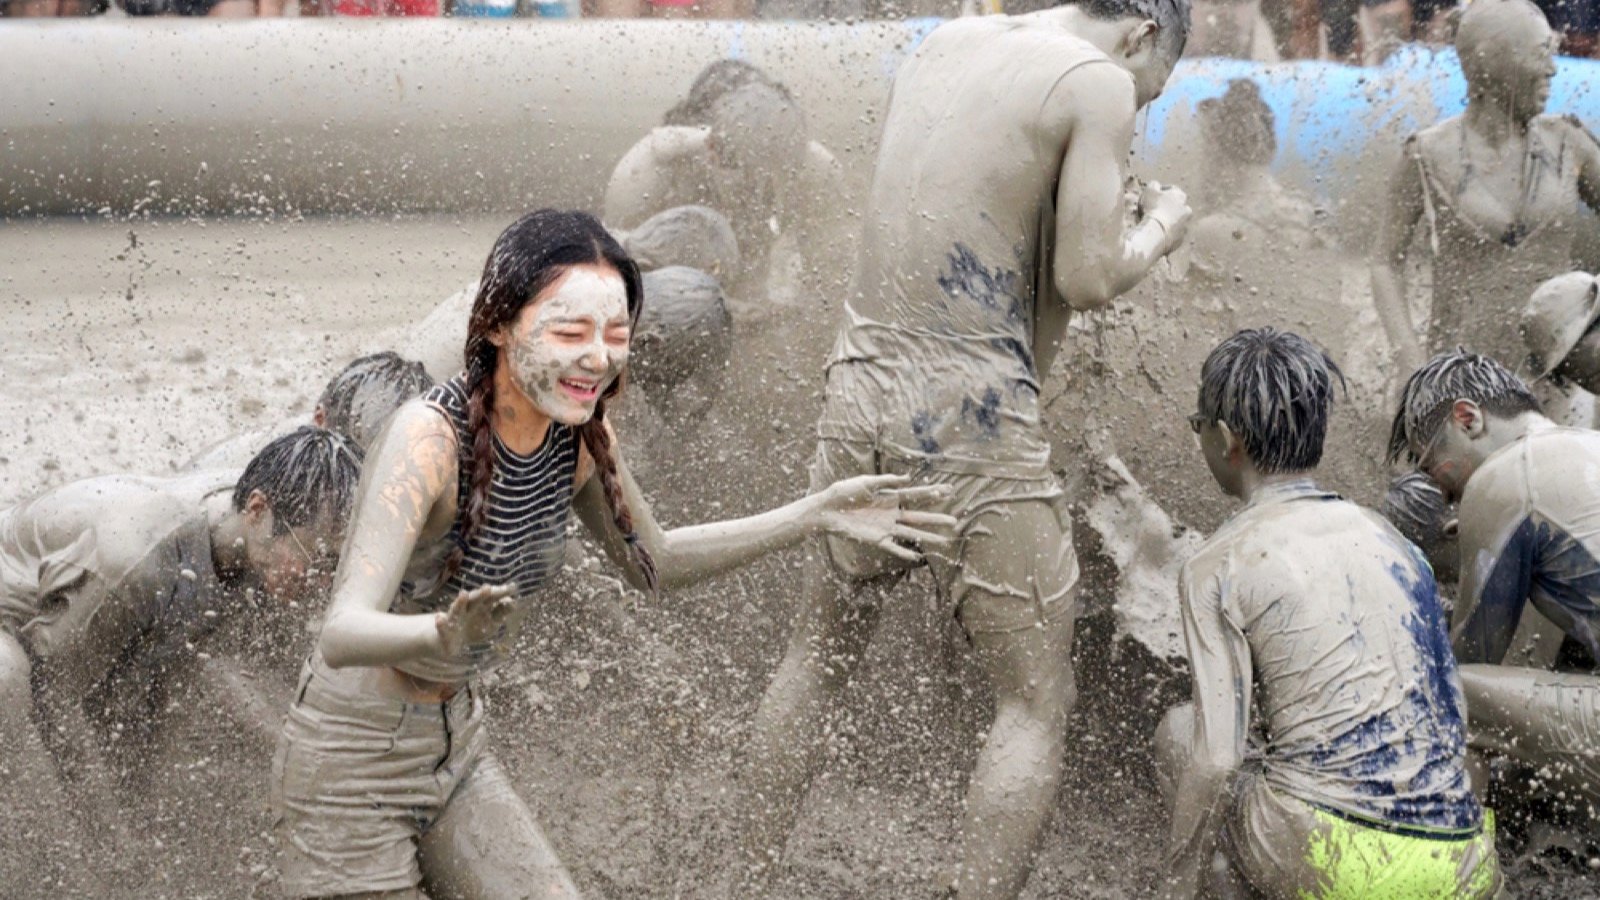 <p>If rolling around in the mud with strangers sounds fun, book your ticket to South Korea this summer. Held in July every year, this festival draws people from all over to participate in mud wrestling, mud bathing, and anything else mud-related. This slop-fest started to promote the mineral-rich mud found in the Boryeong region but has become more of a social festival.</p>